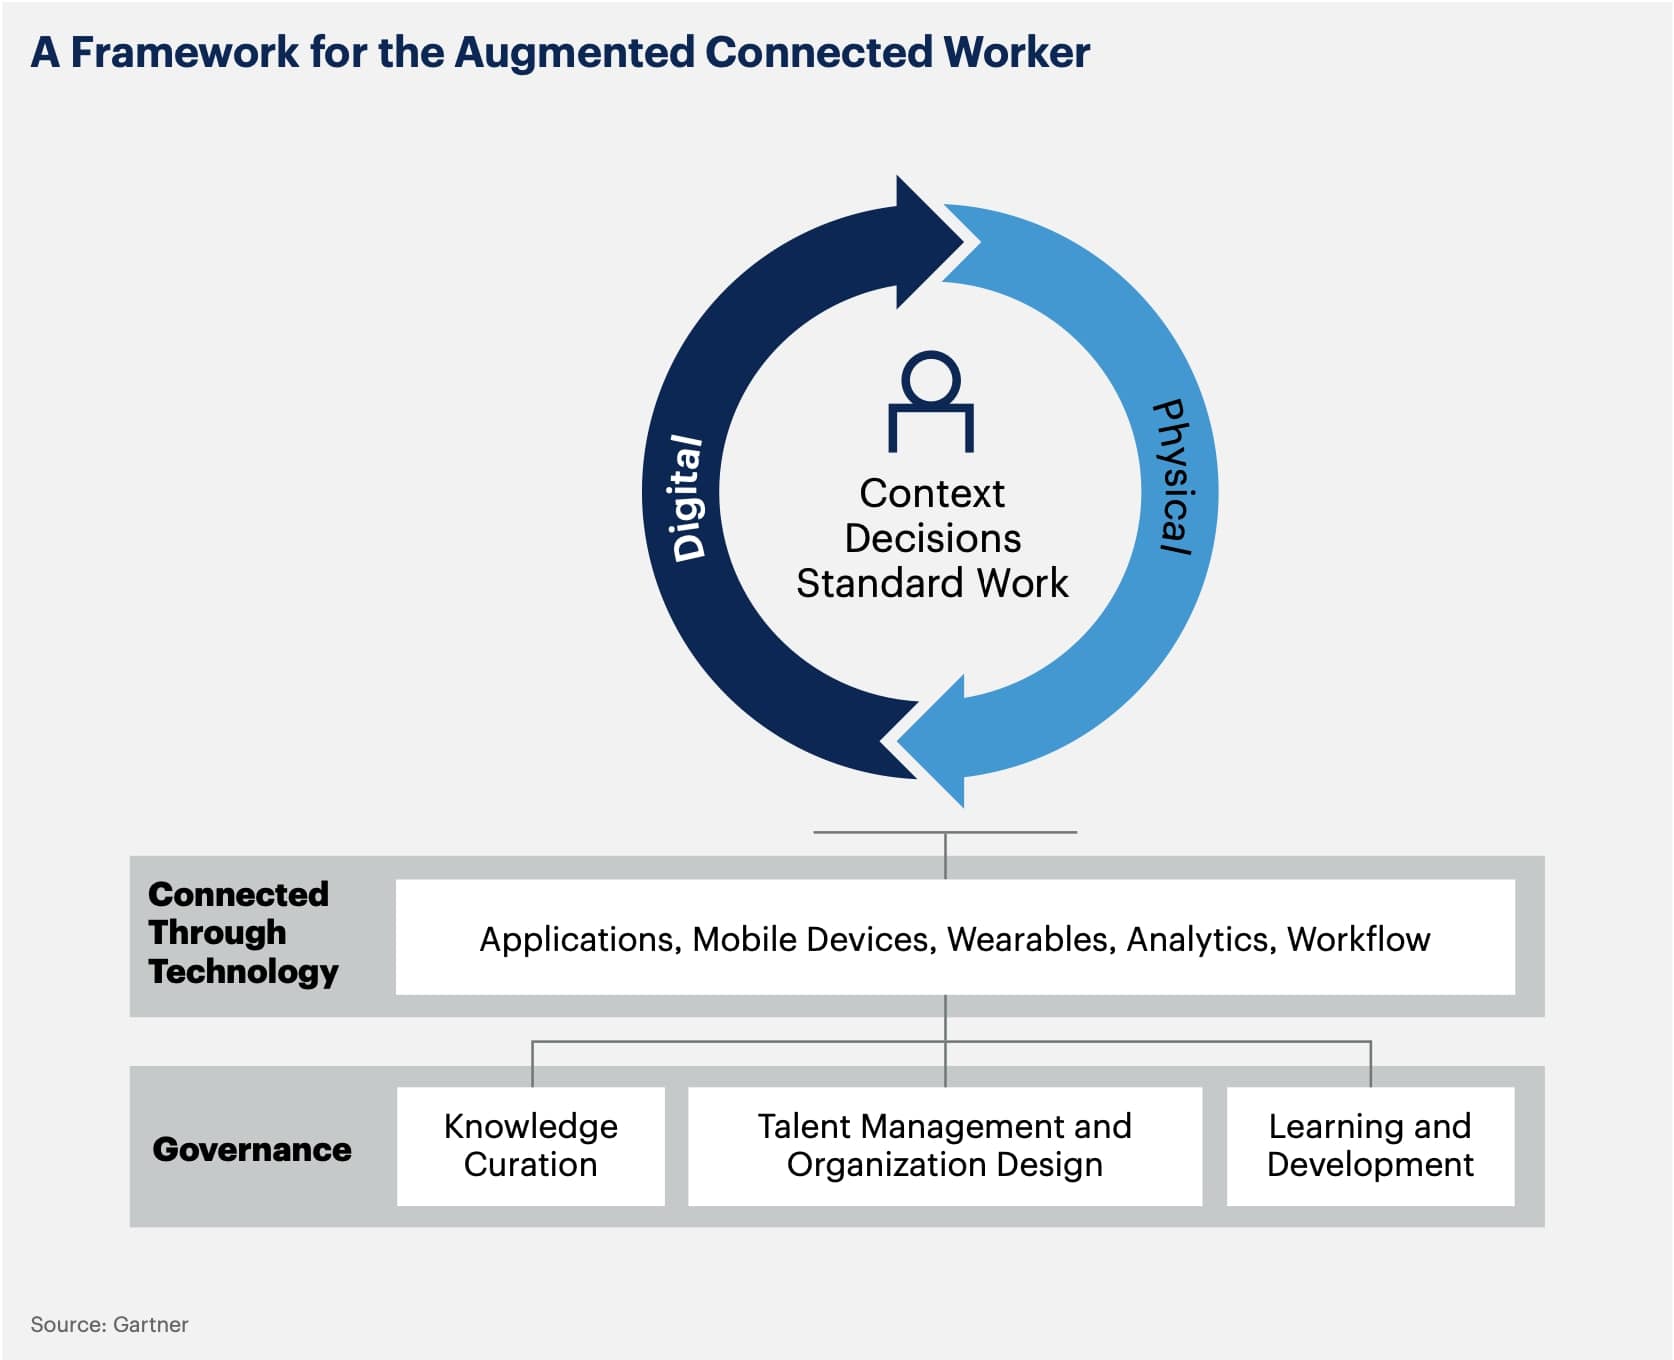 A Framework for the Augmented Connected Worker - Gartner